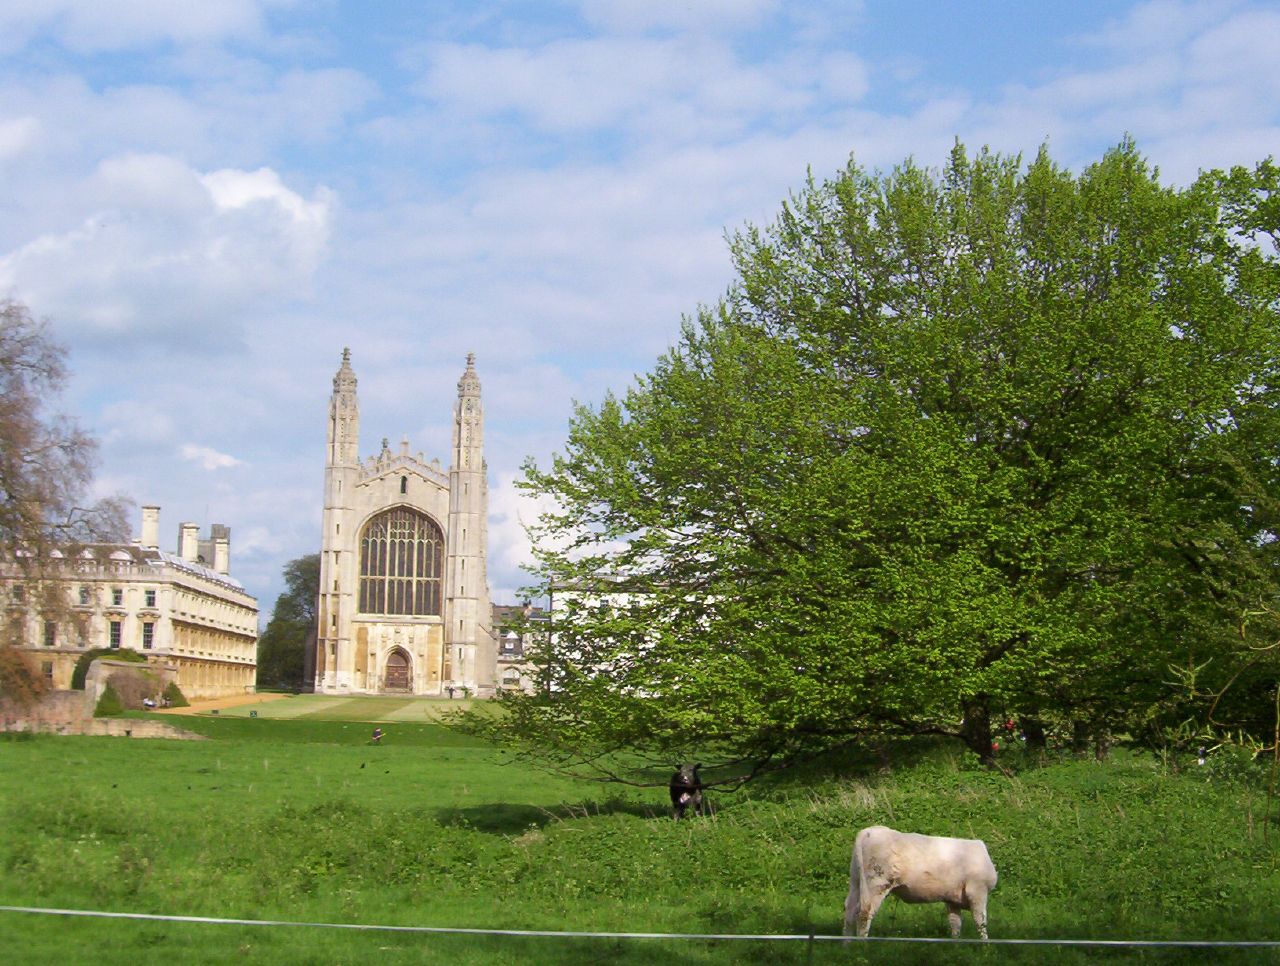 a white cow standing in a grassy field in front of a church